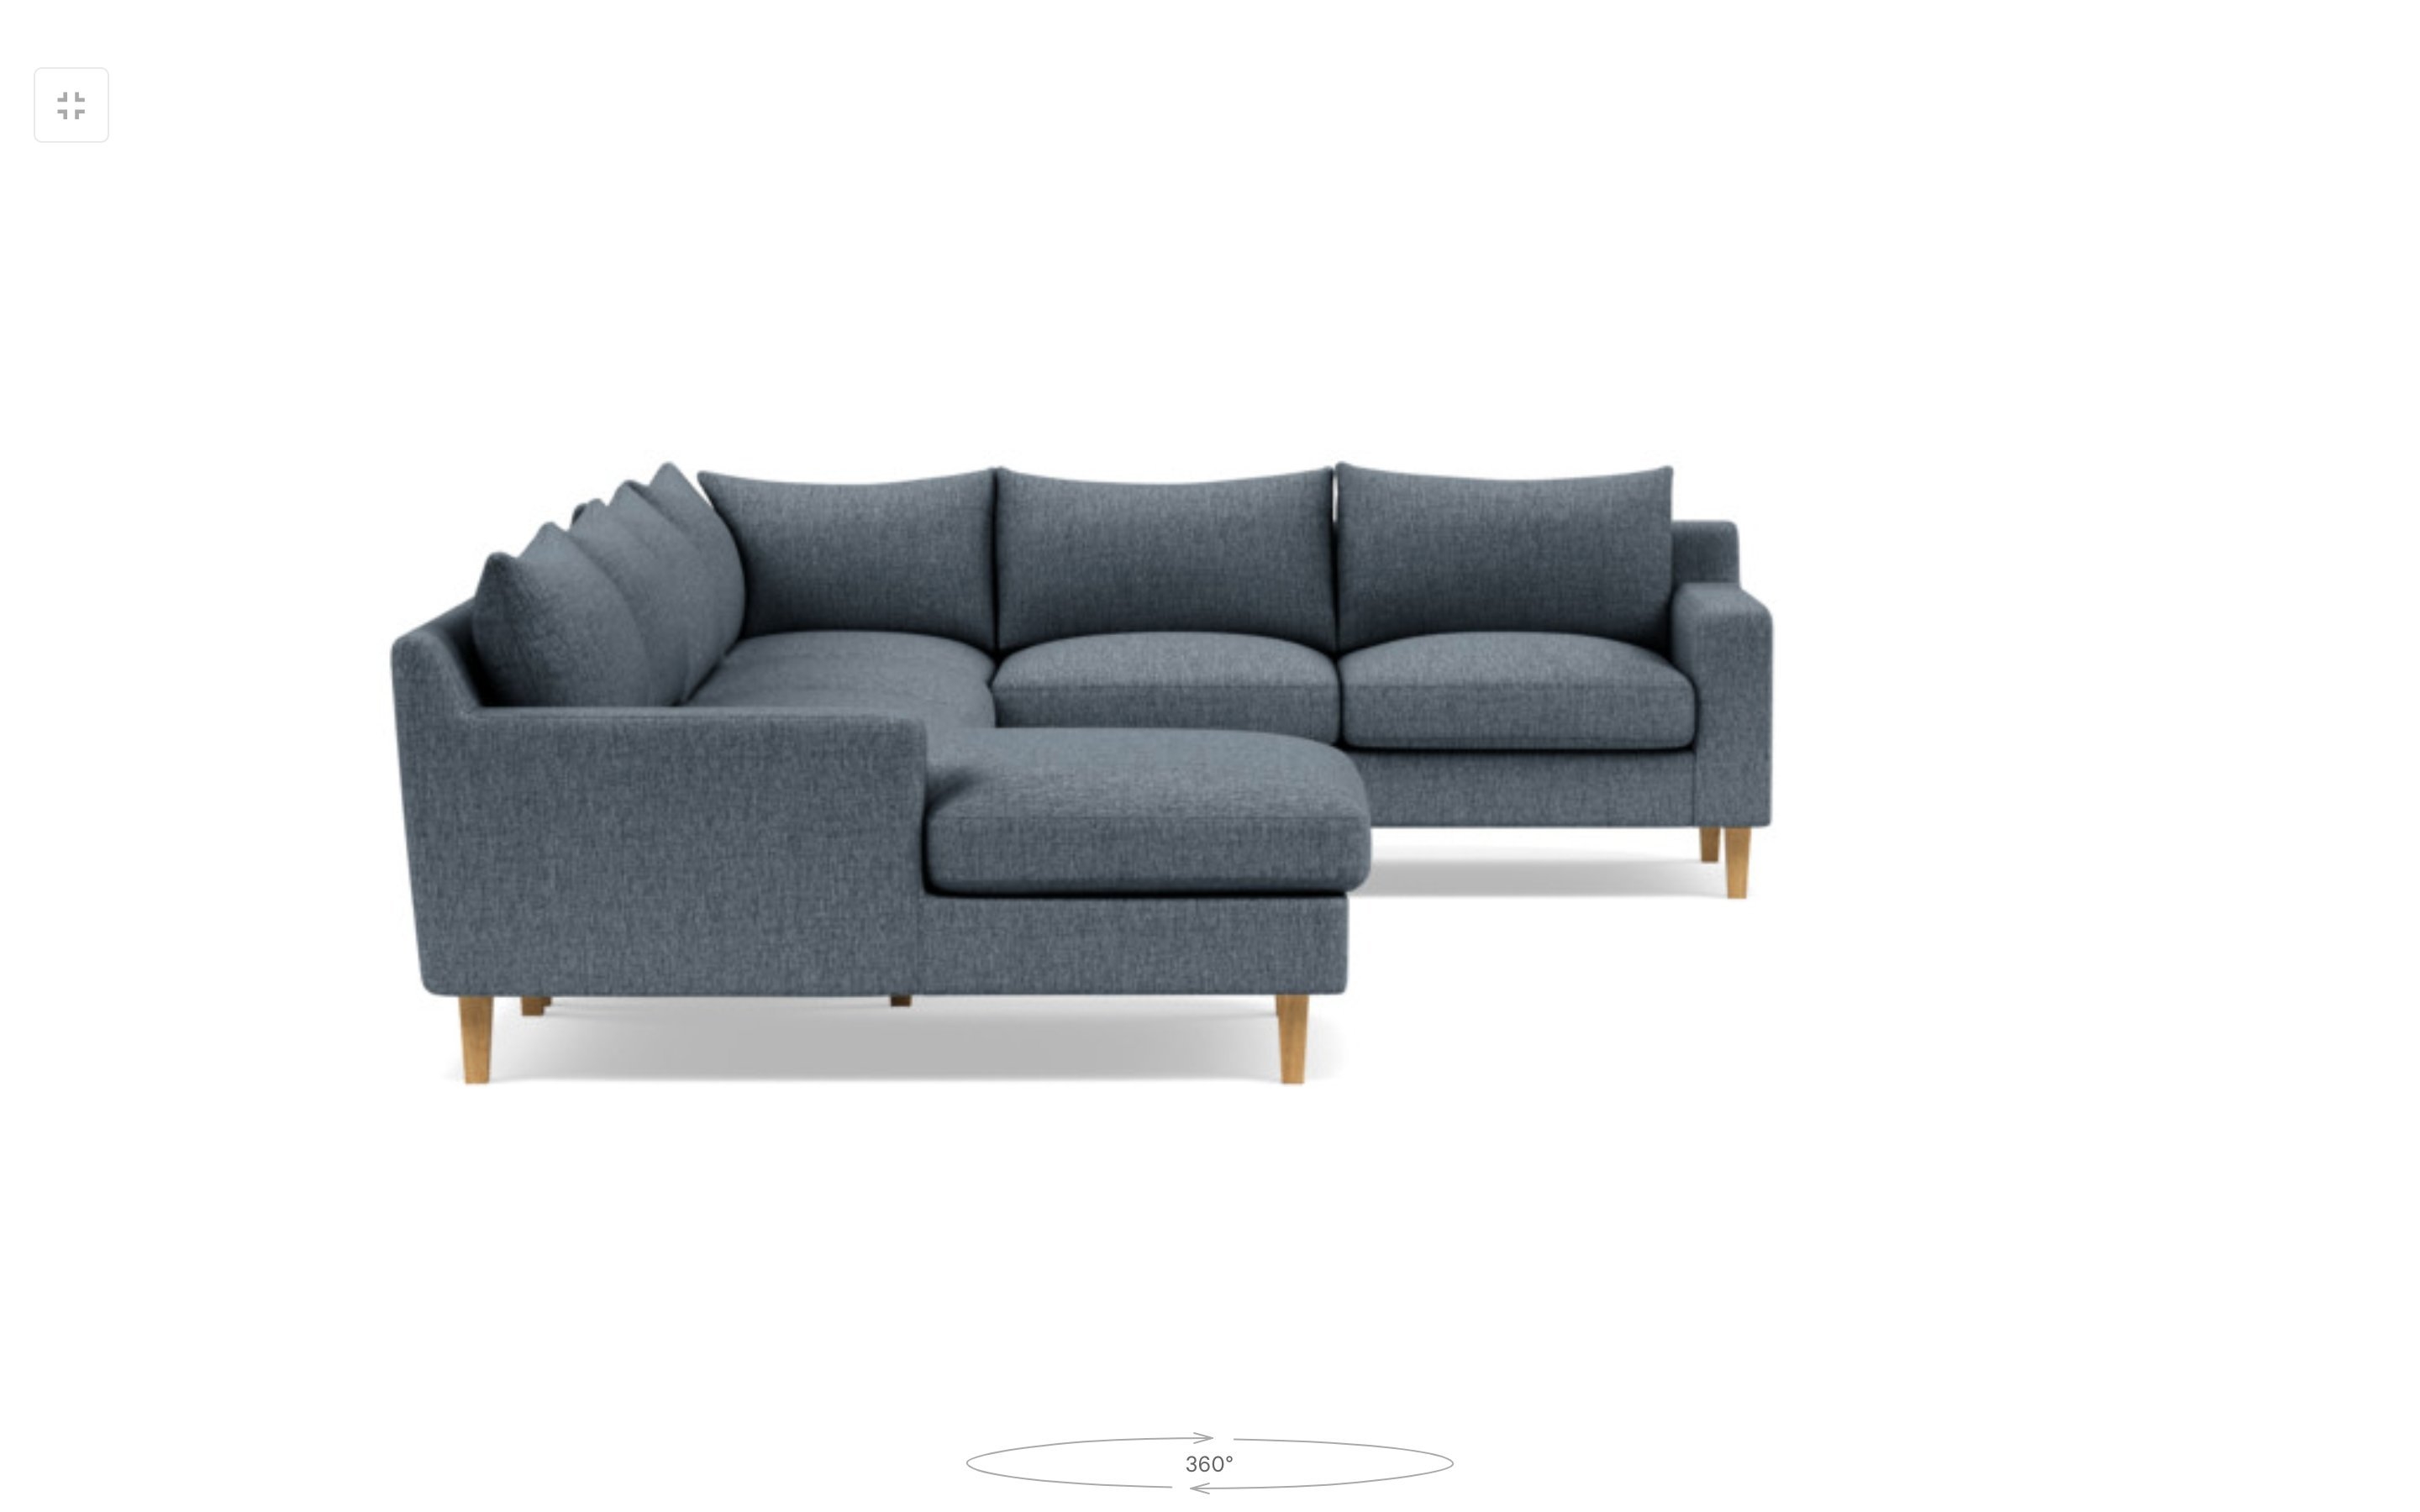 Sloan 4-Piece Corner Sectional Sofa with Left Chaise - Image 2